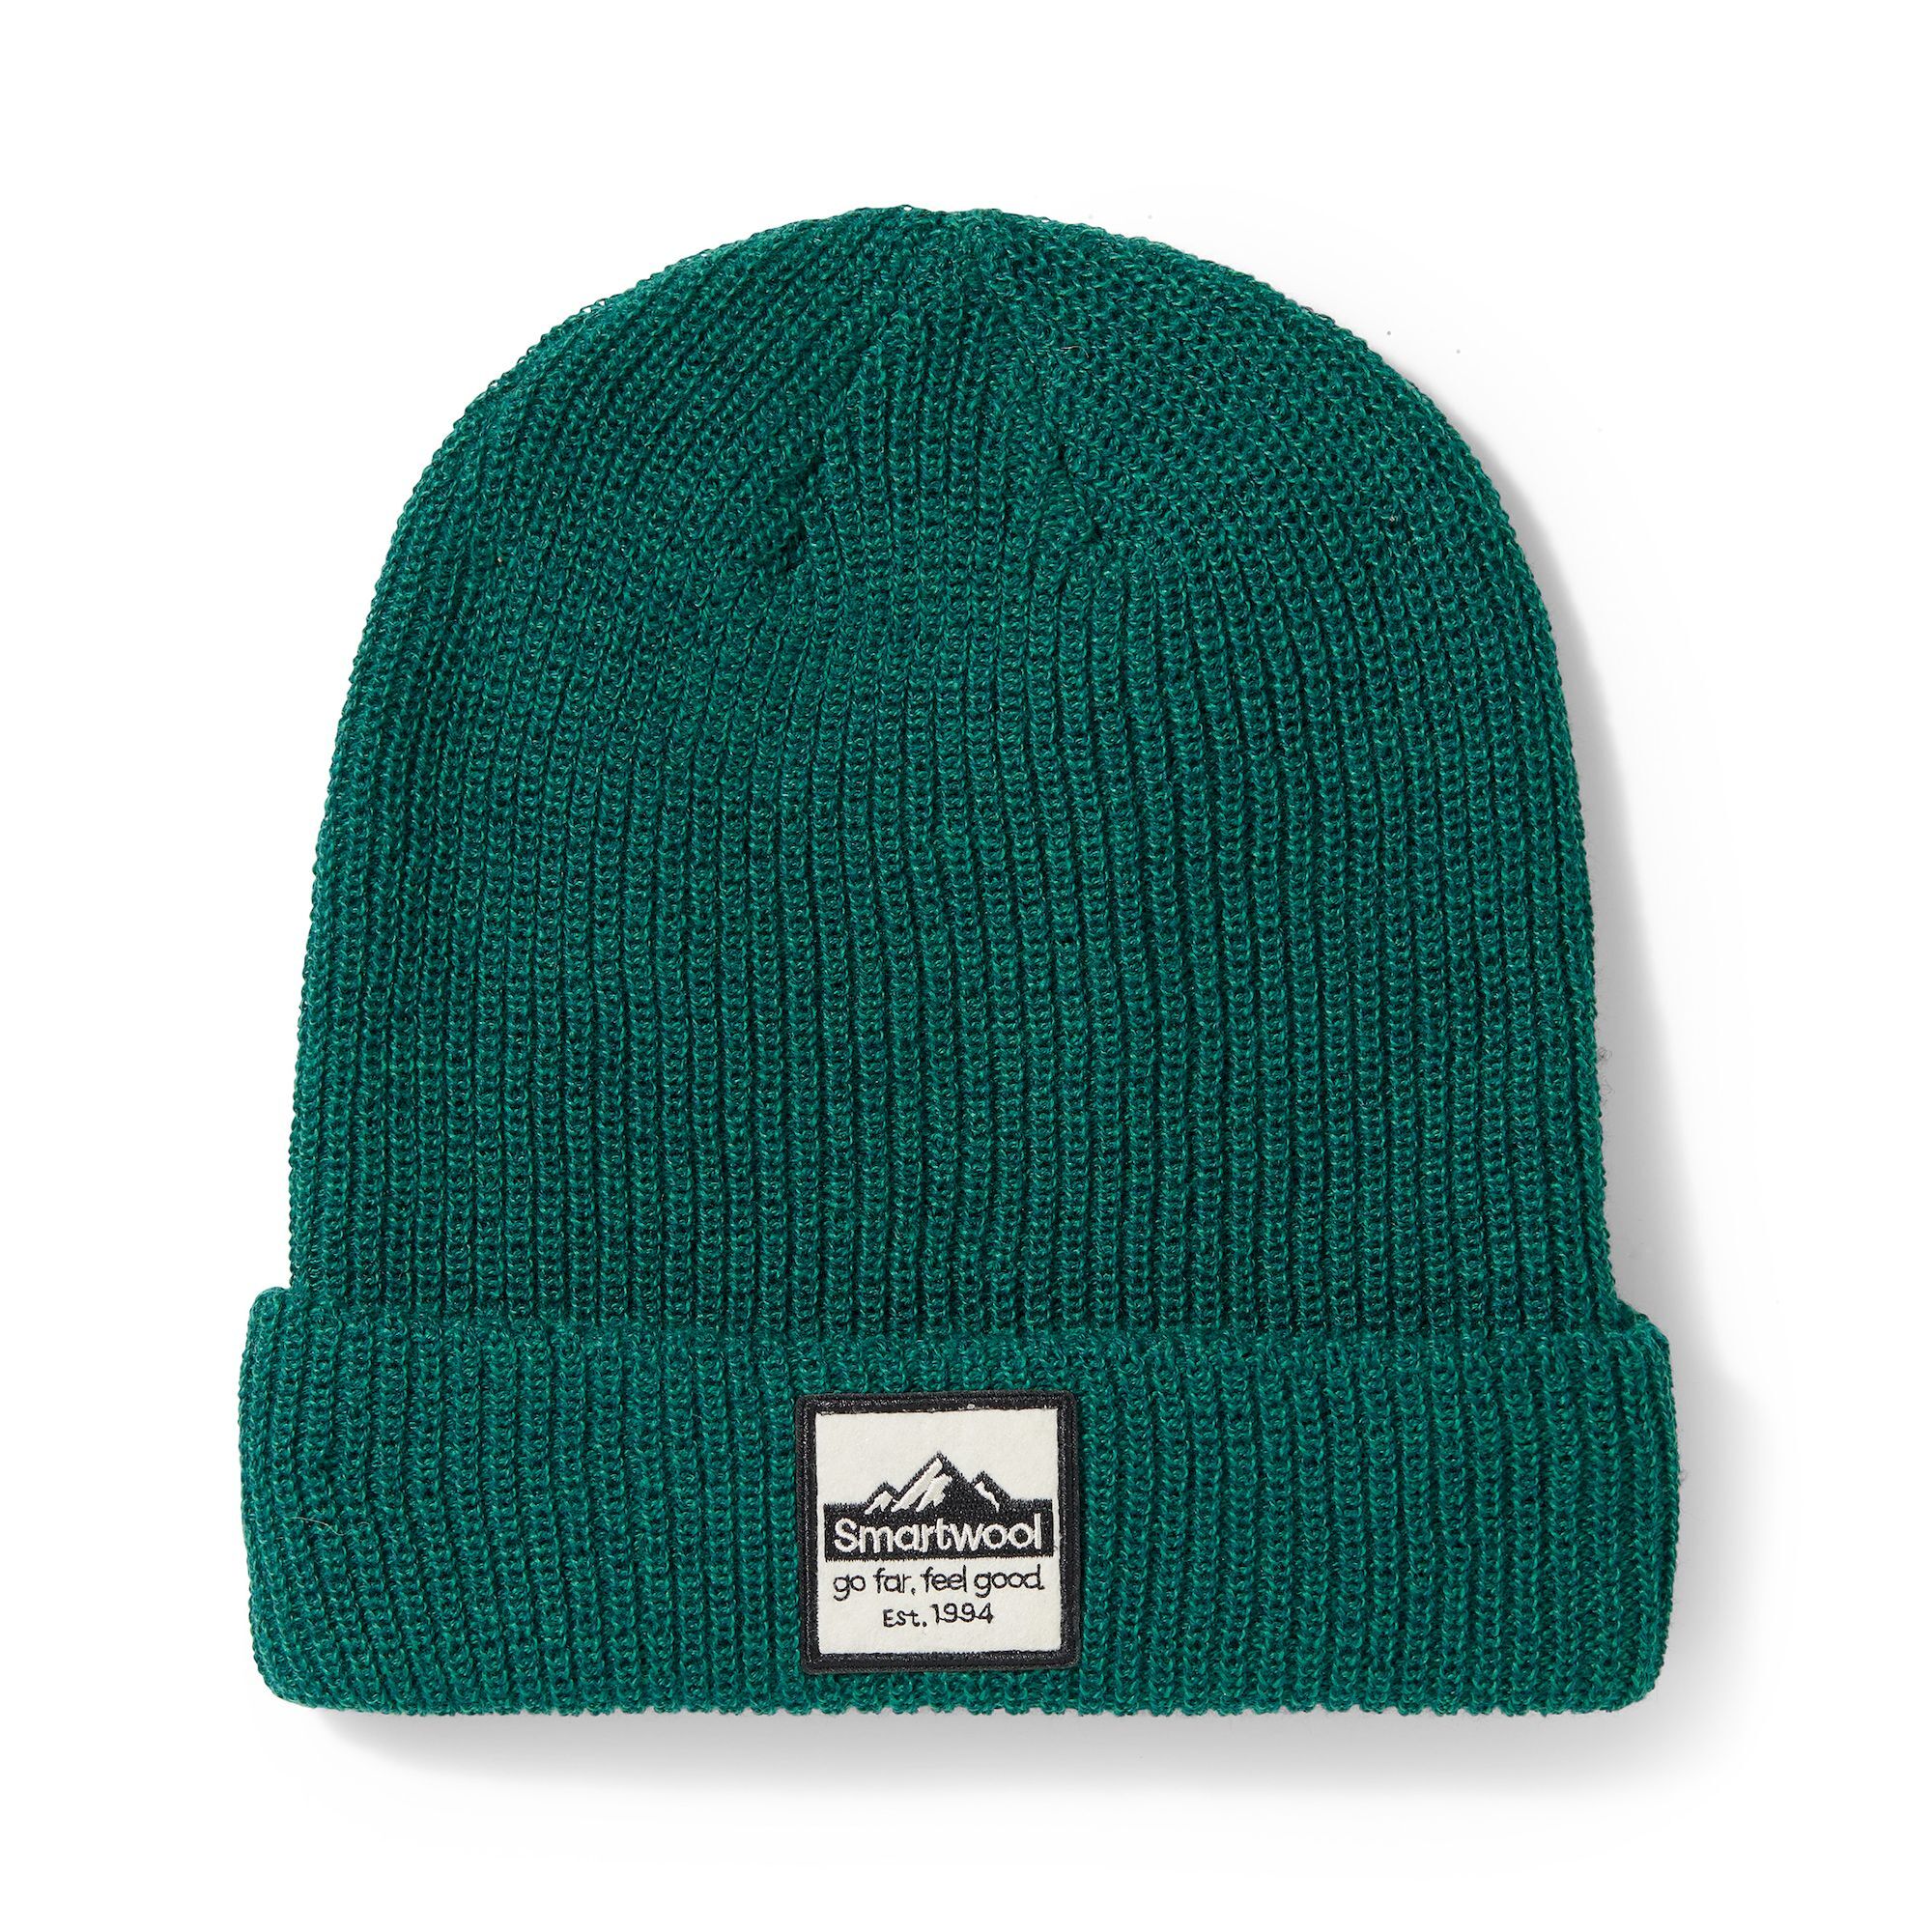 Smartwool Smartwool Patch Beanie - Beanie